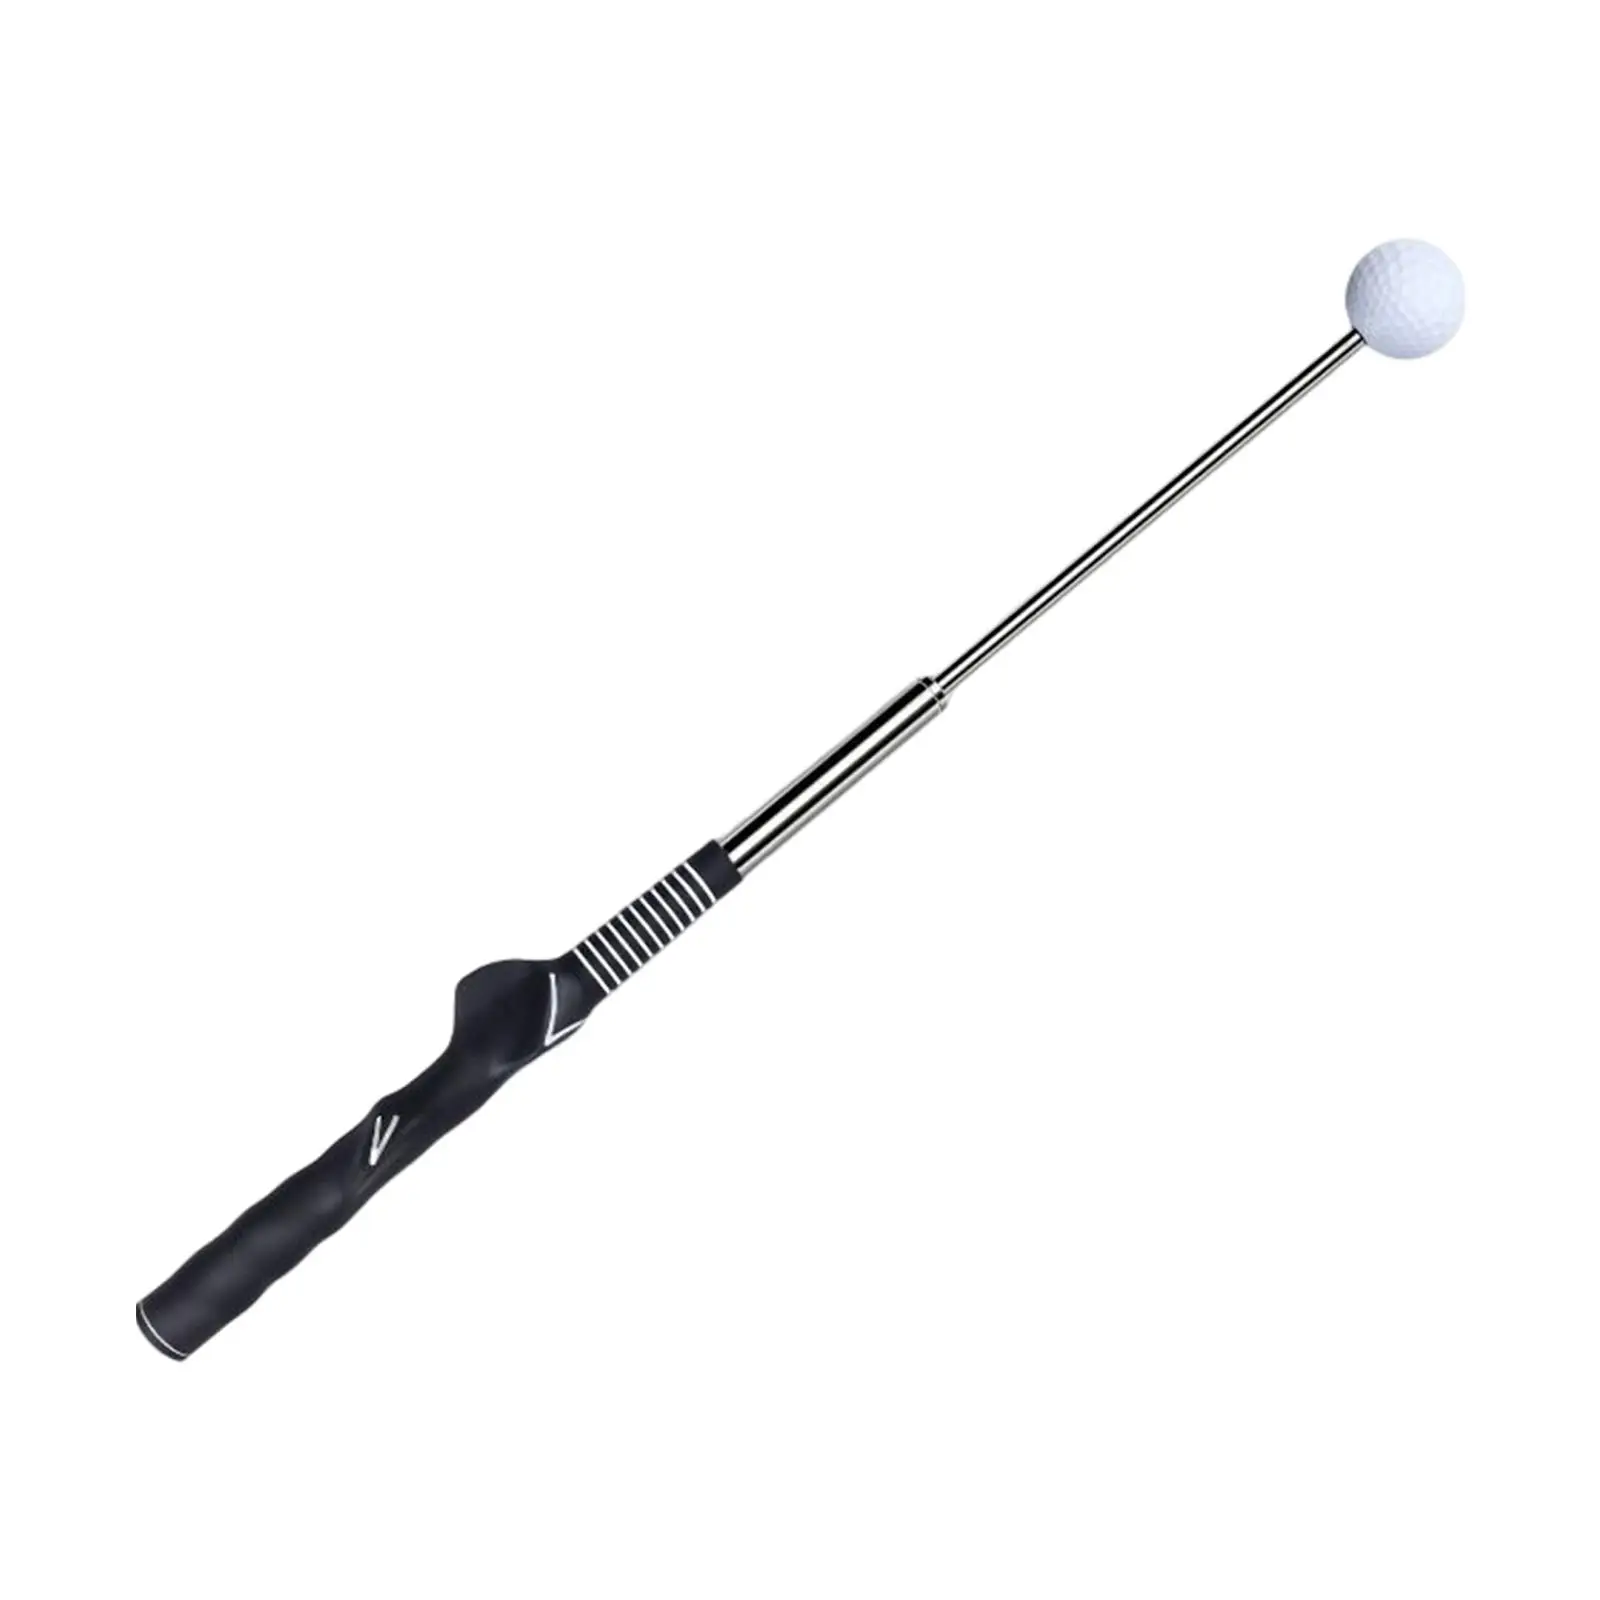 

Telescopic Warm up Stick Practice Equipment Sports Golf Swing Trainer Aid for Golf Club Improved Tempo Balance Strength Training